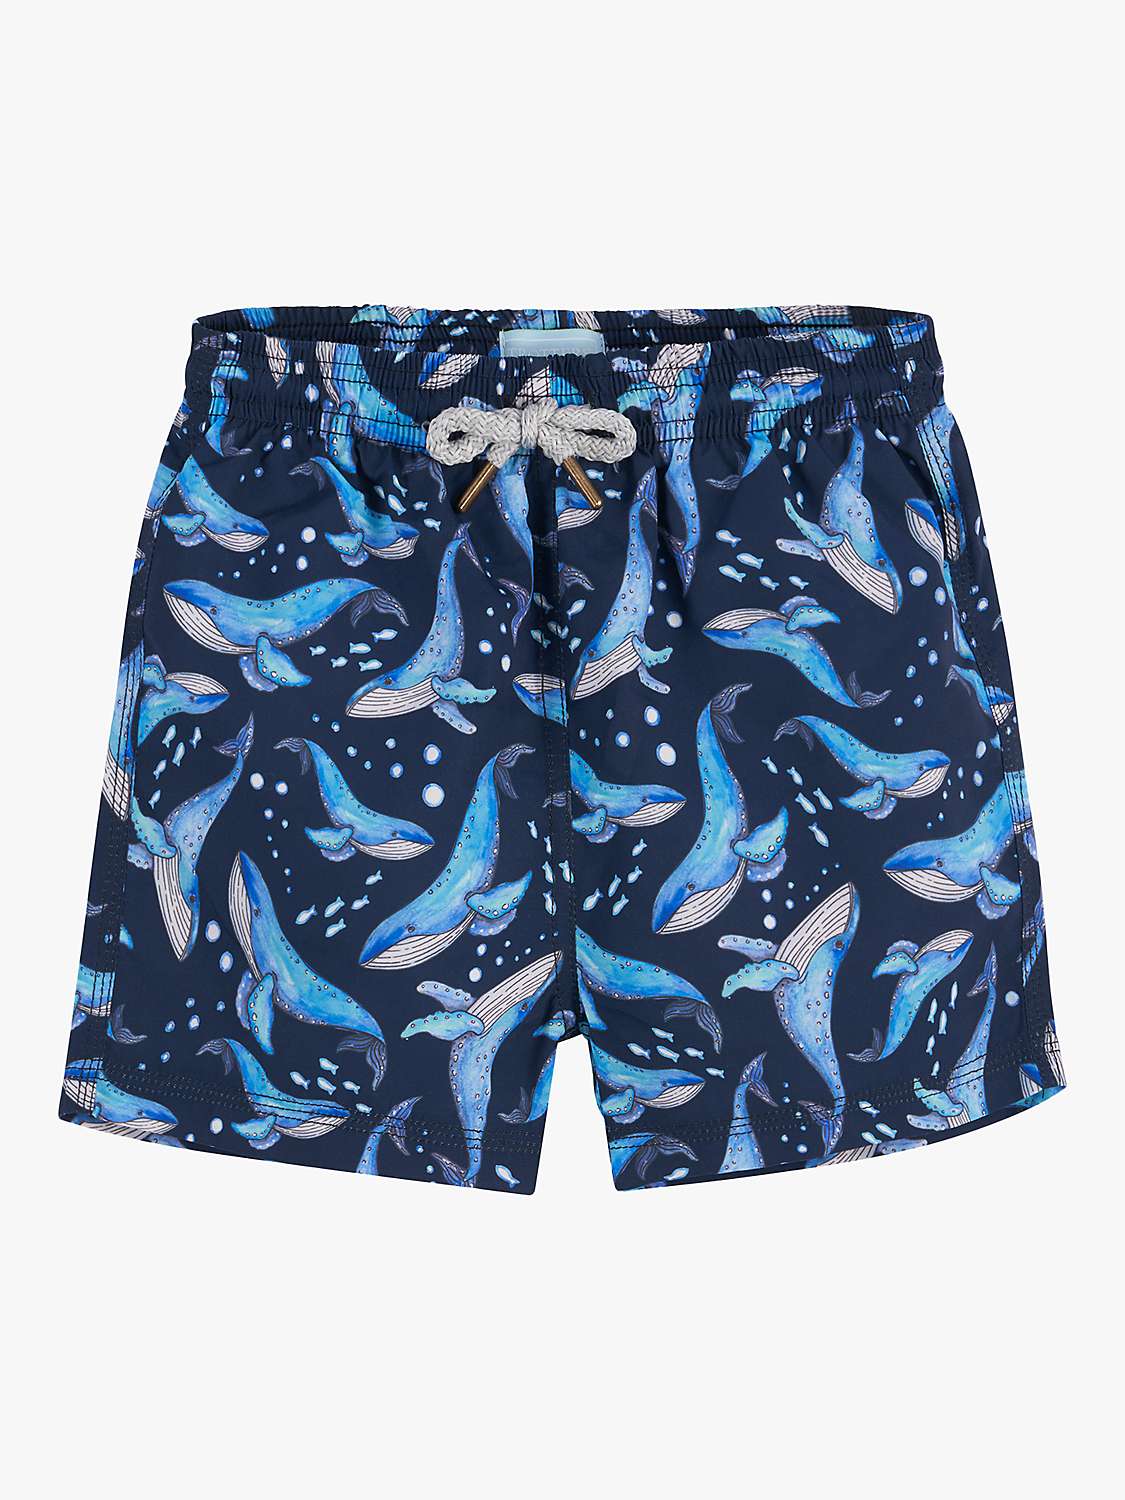 Trotters Baby Whale Swim Shorts, Navy/Whale at John Lewis & Partners